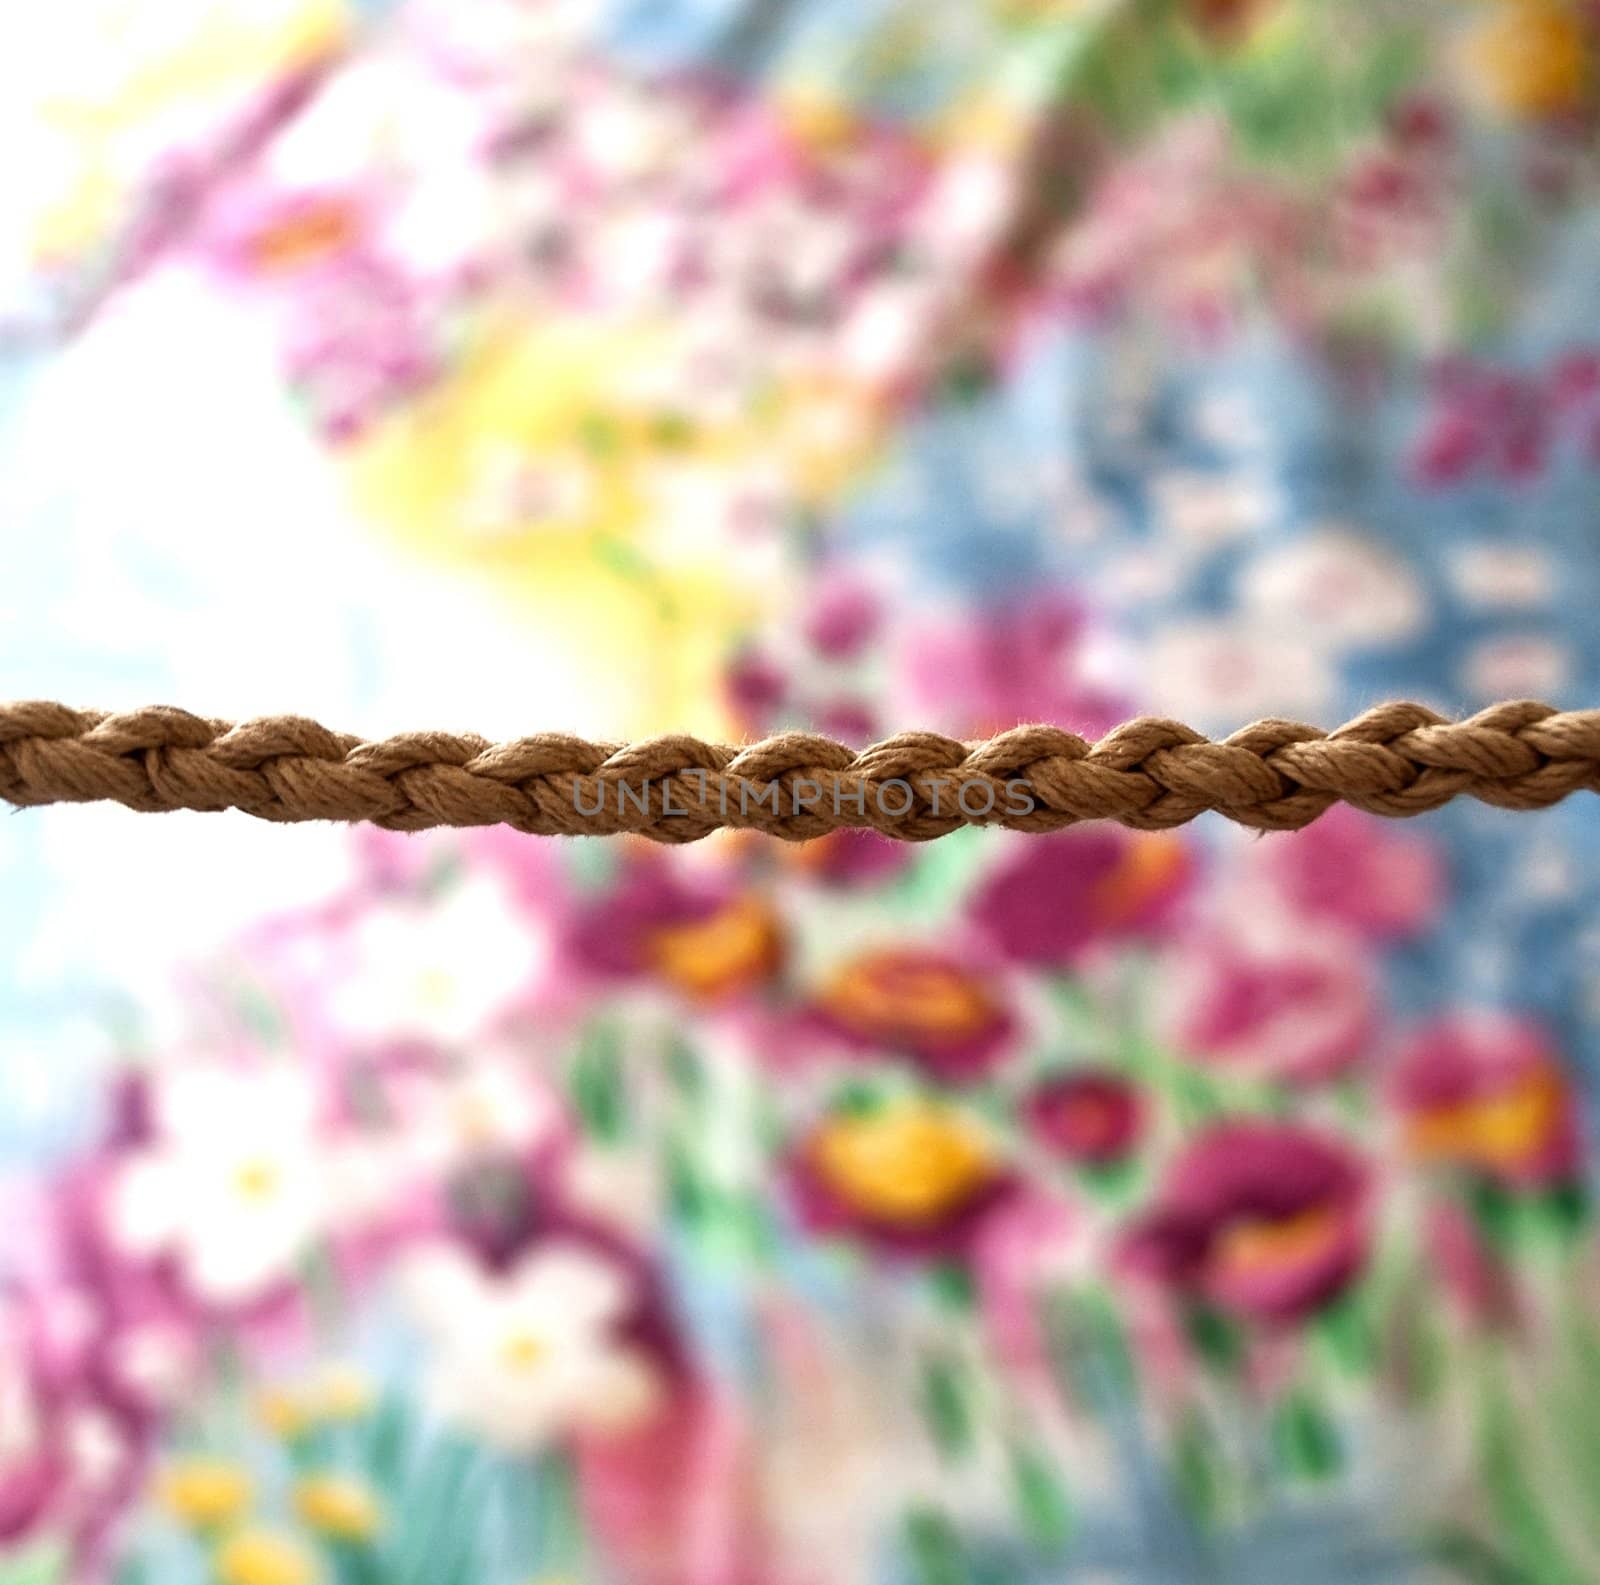 Rope against a colorful background